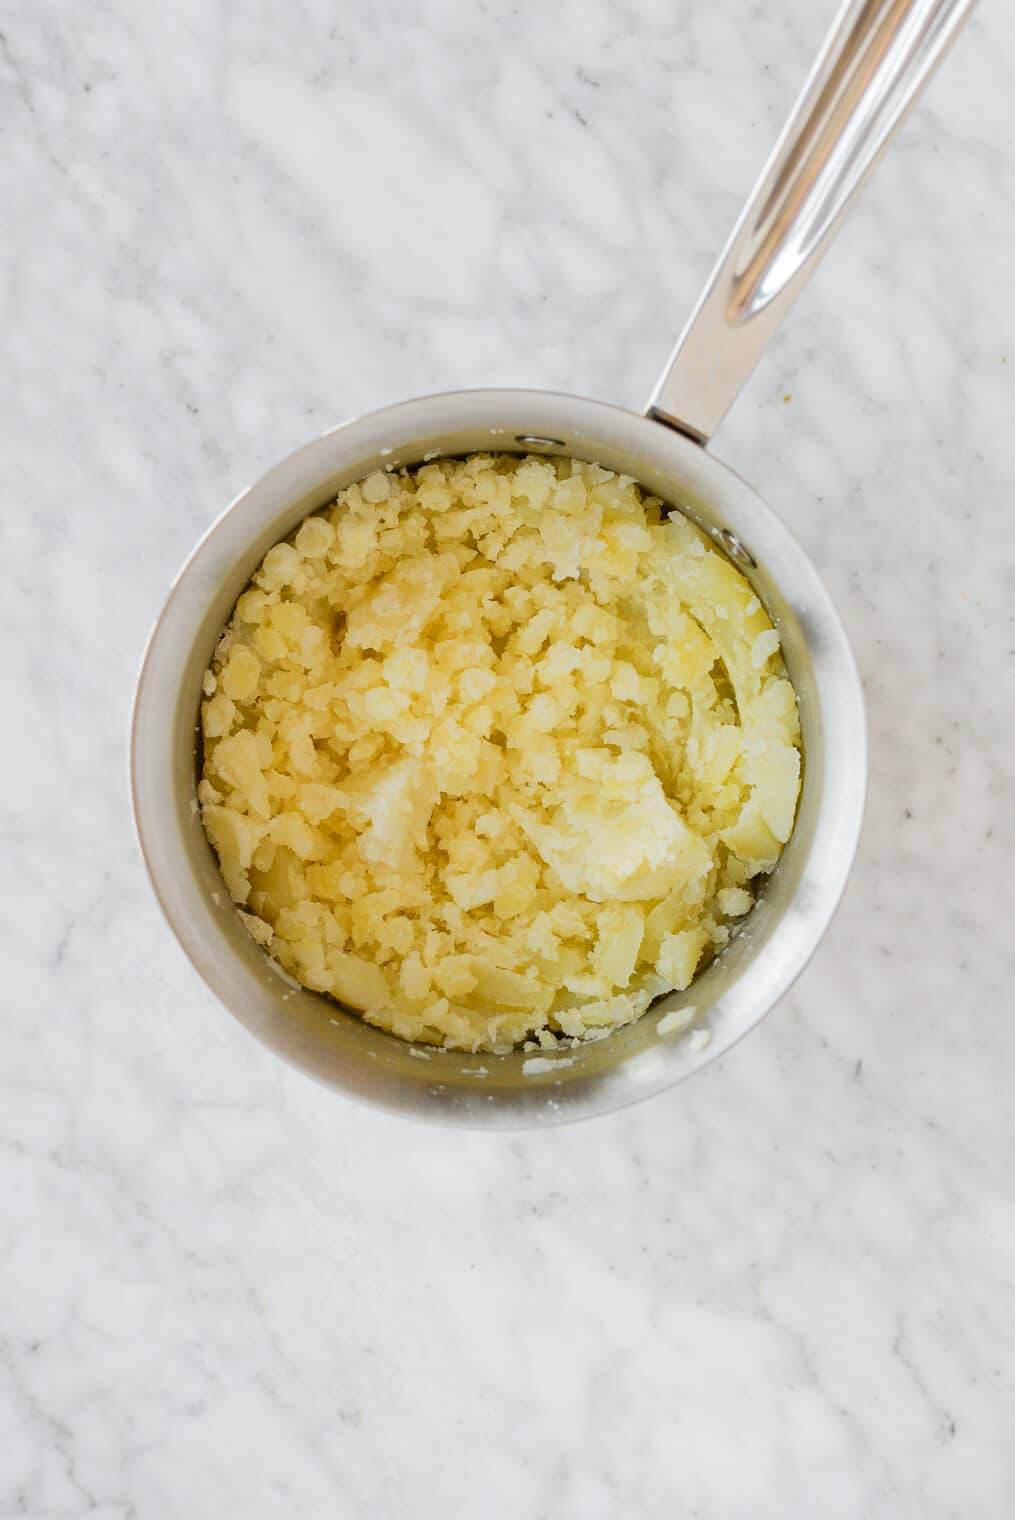 just mashed potatoes sitting in a pot on a marble surface